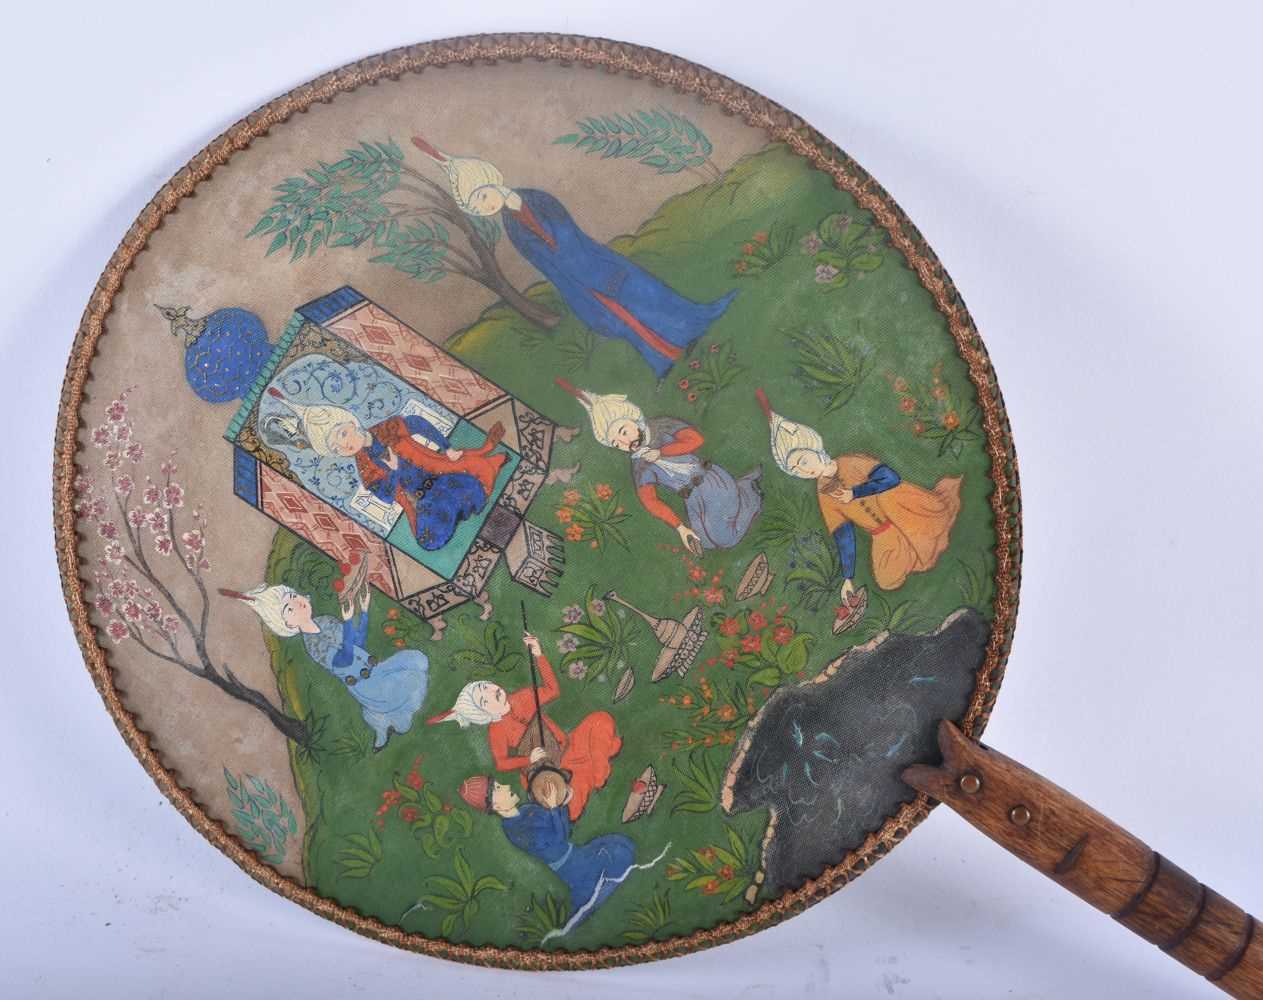 A 19TH CENTURY FRENCH CHAMPLEVE ENAMEL BRONZE DESK BLOTTER together with a Persian painted fan. - Image 2 of 5